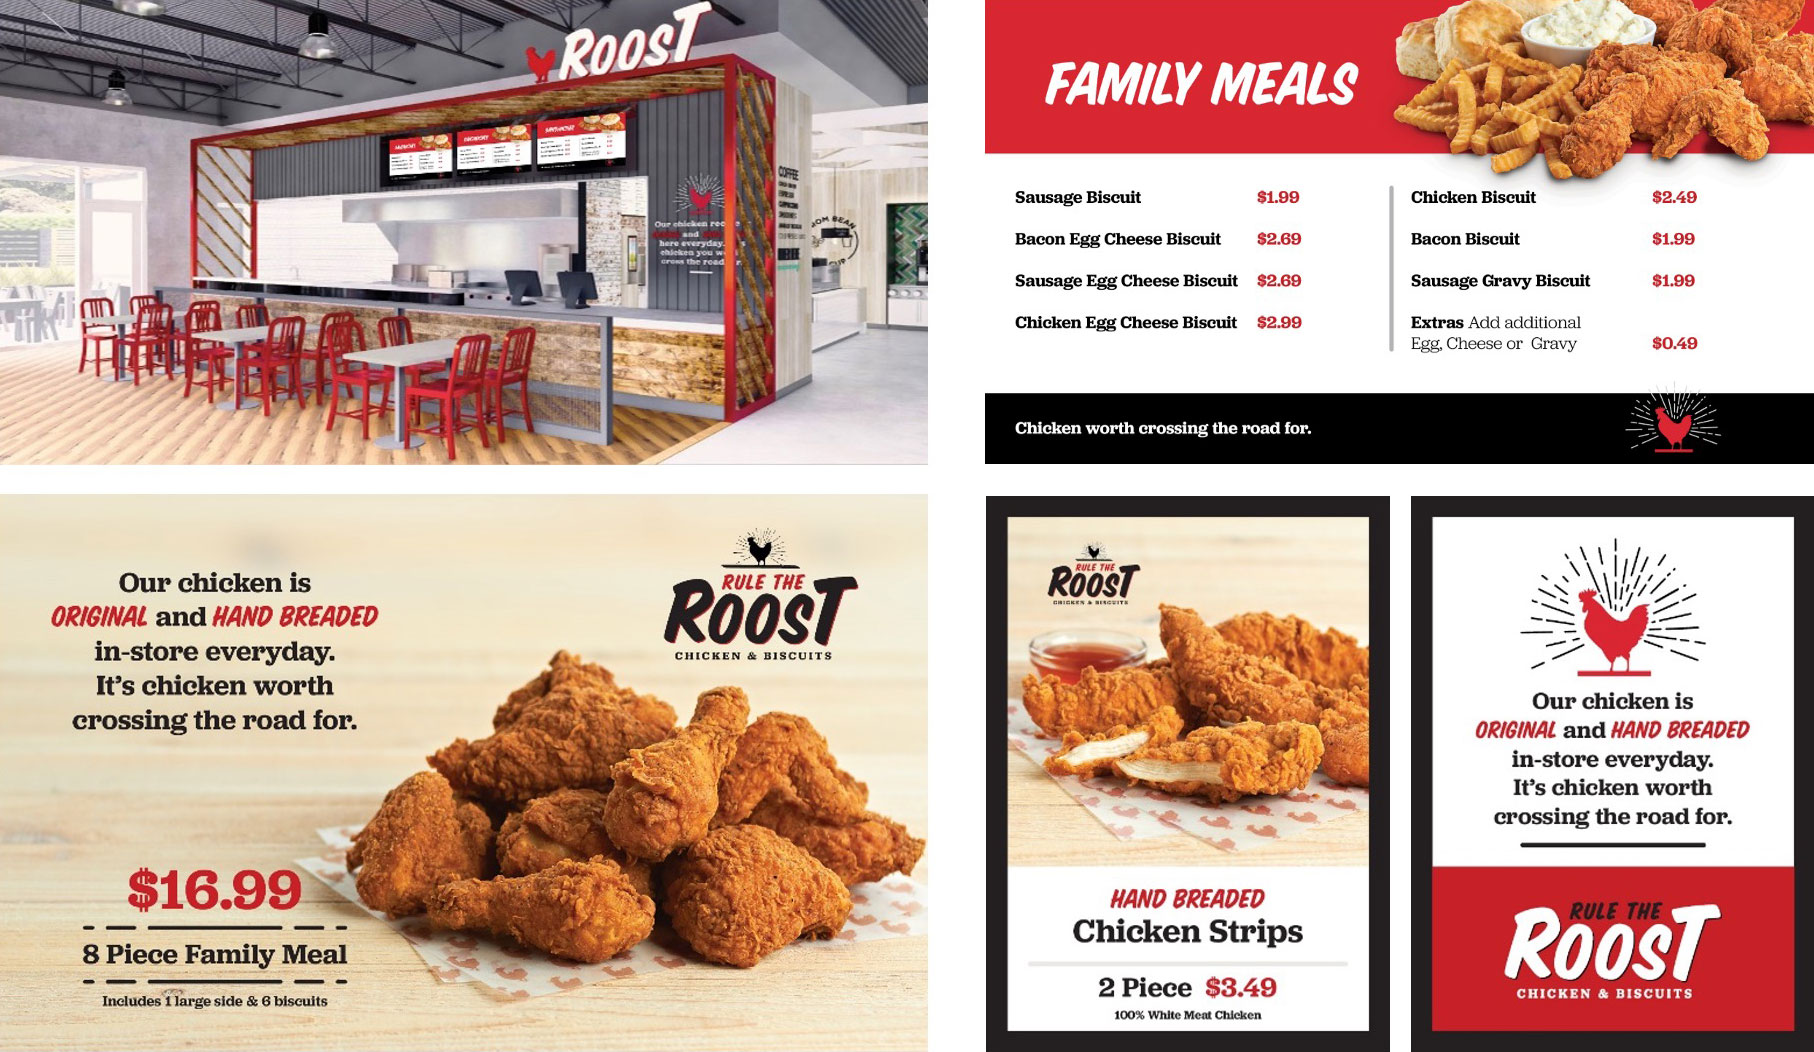 Roost branded signage and menus